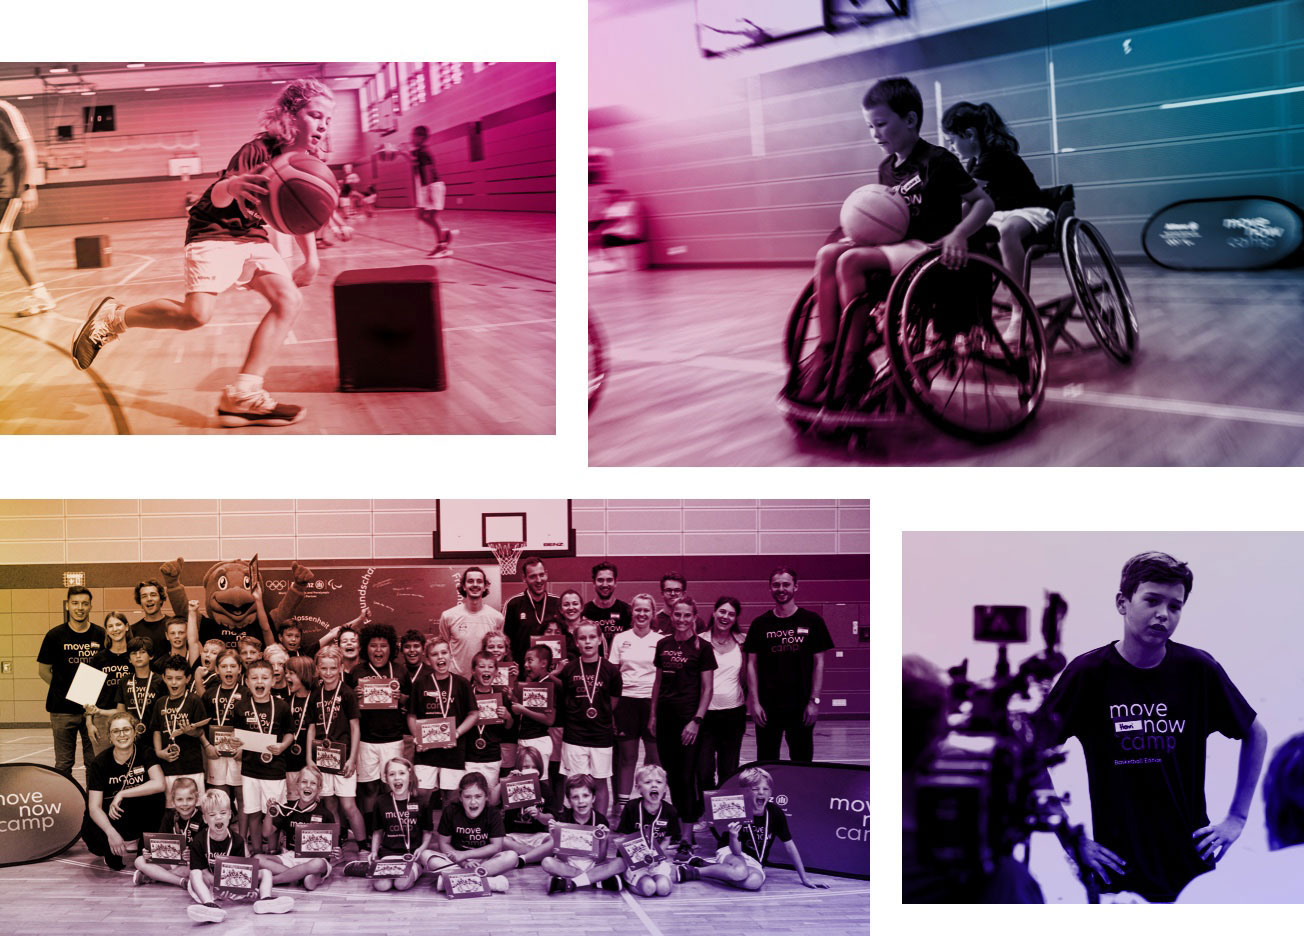 Impressions from the Basketball MoveNow camp: Children (also with wheelchairs) are playing, action, good vibes